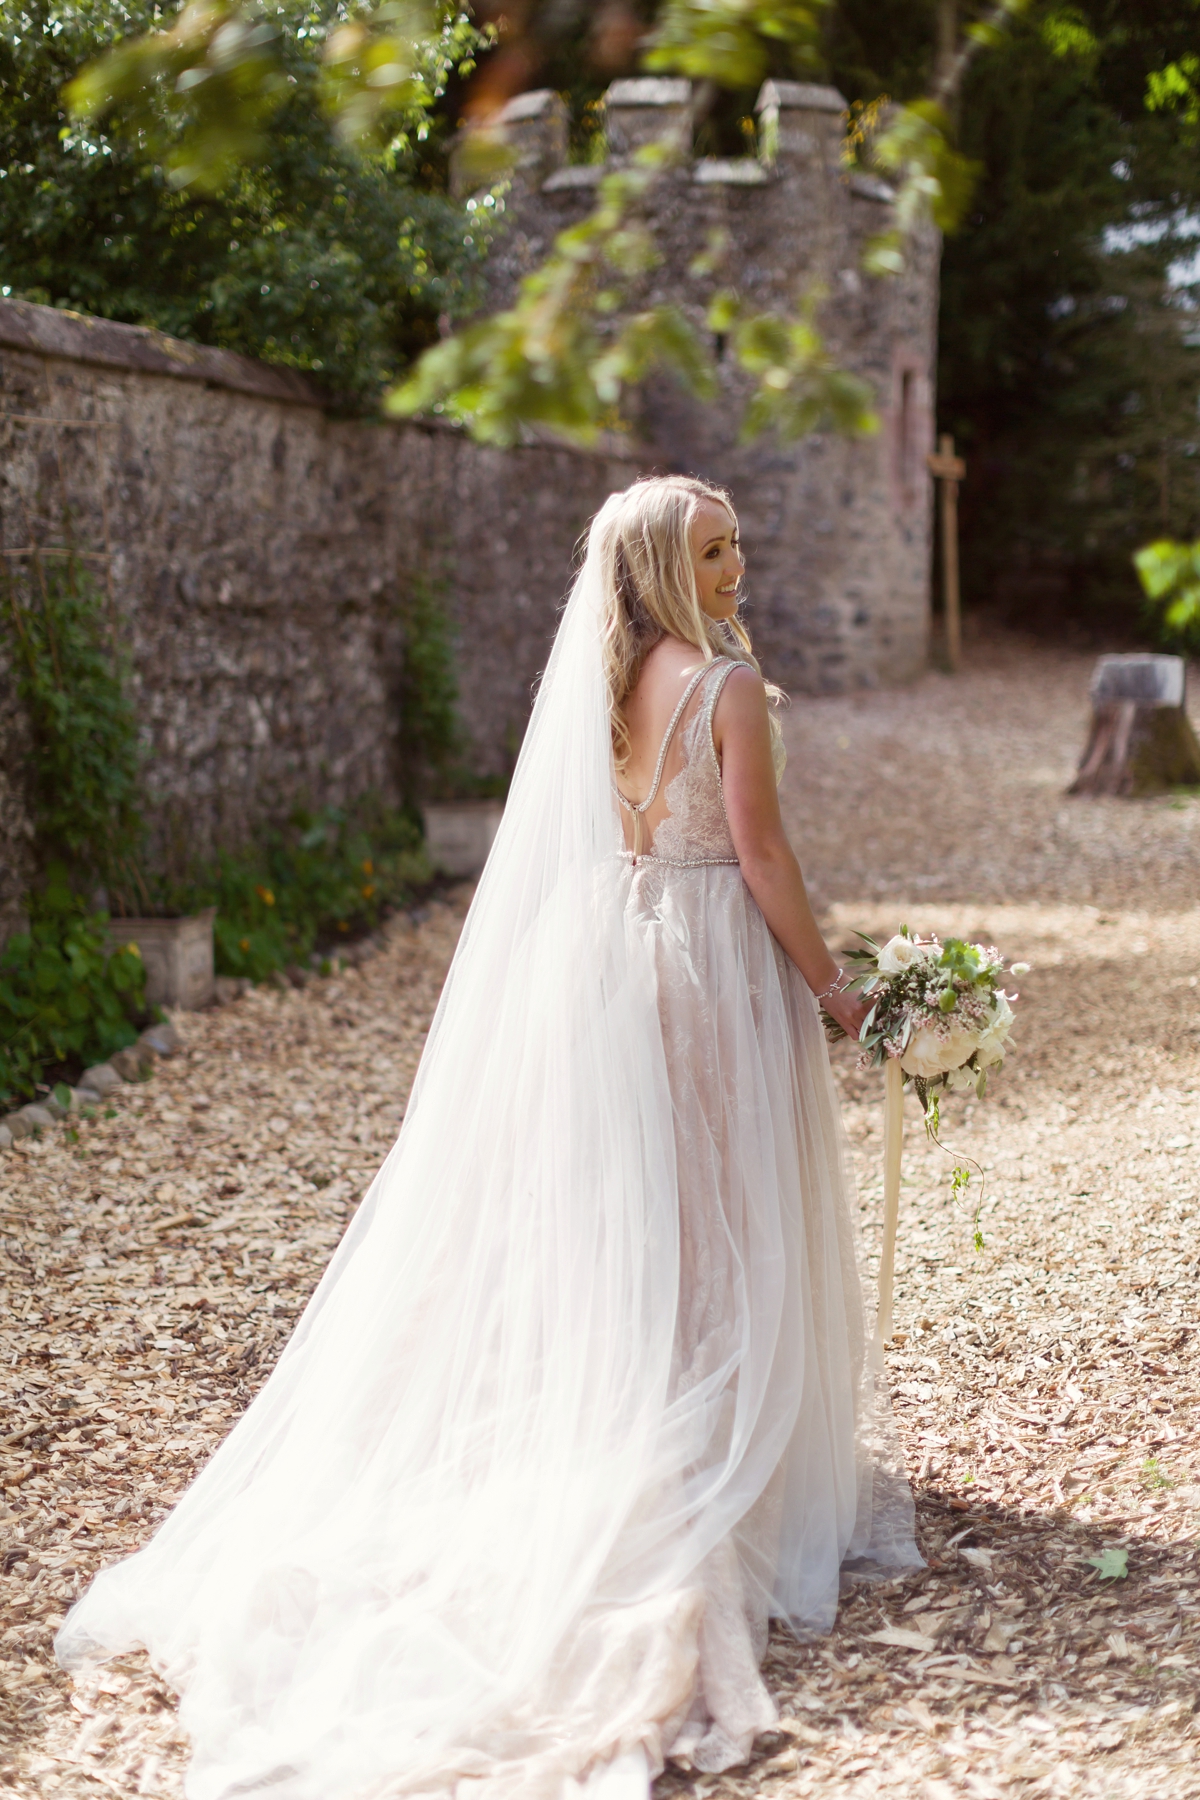 37 A Galia Lahav gown and accents of marble and gold for a scottish castle wedding